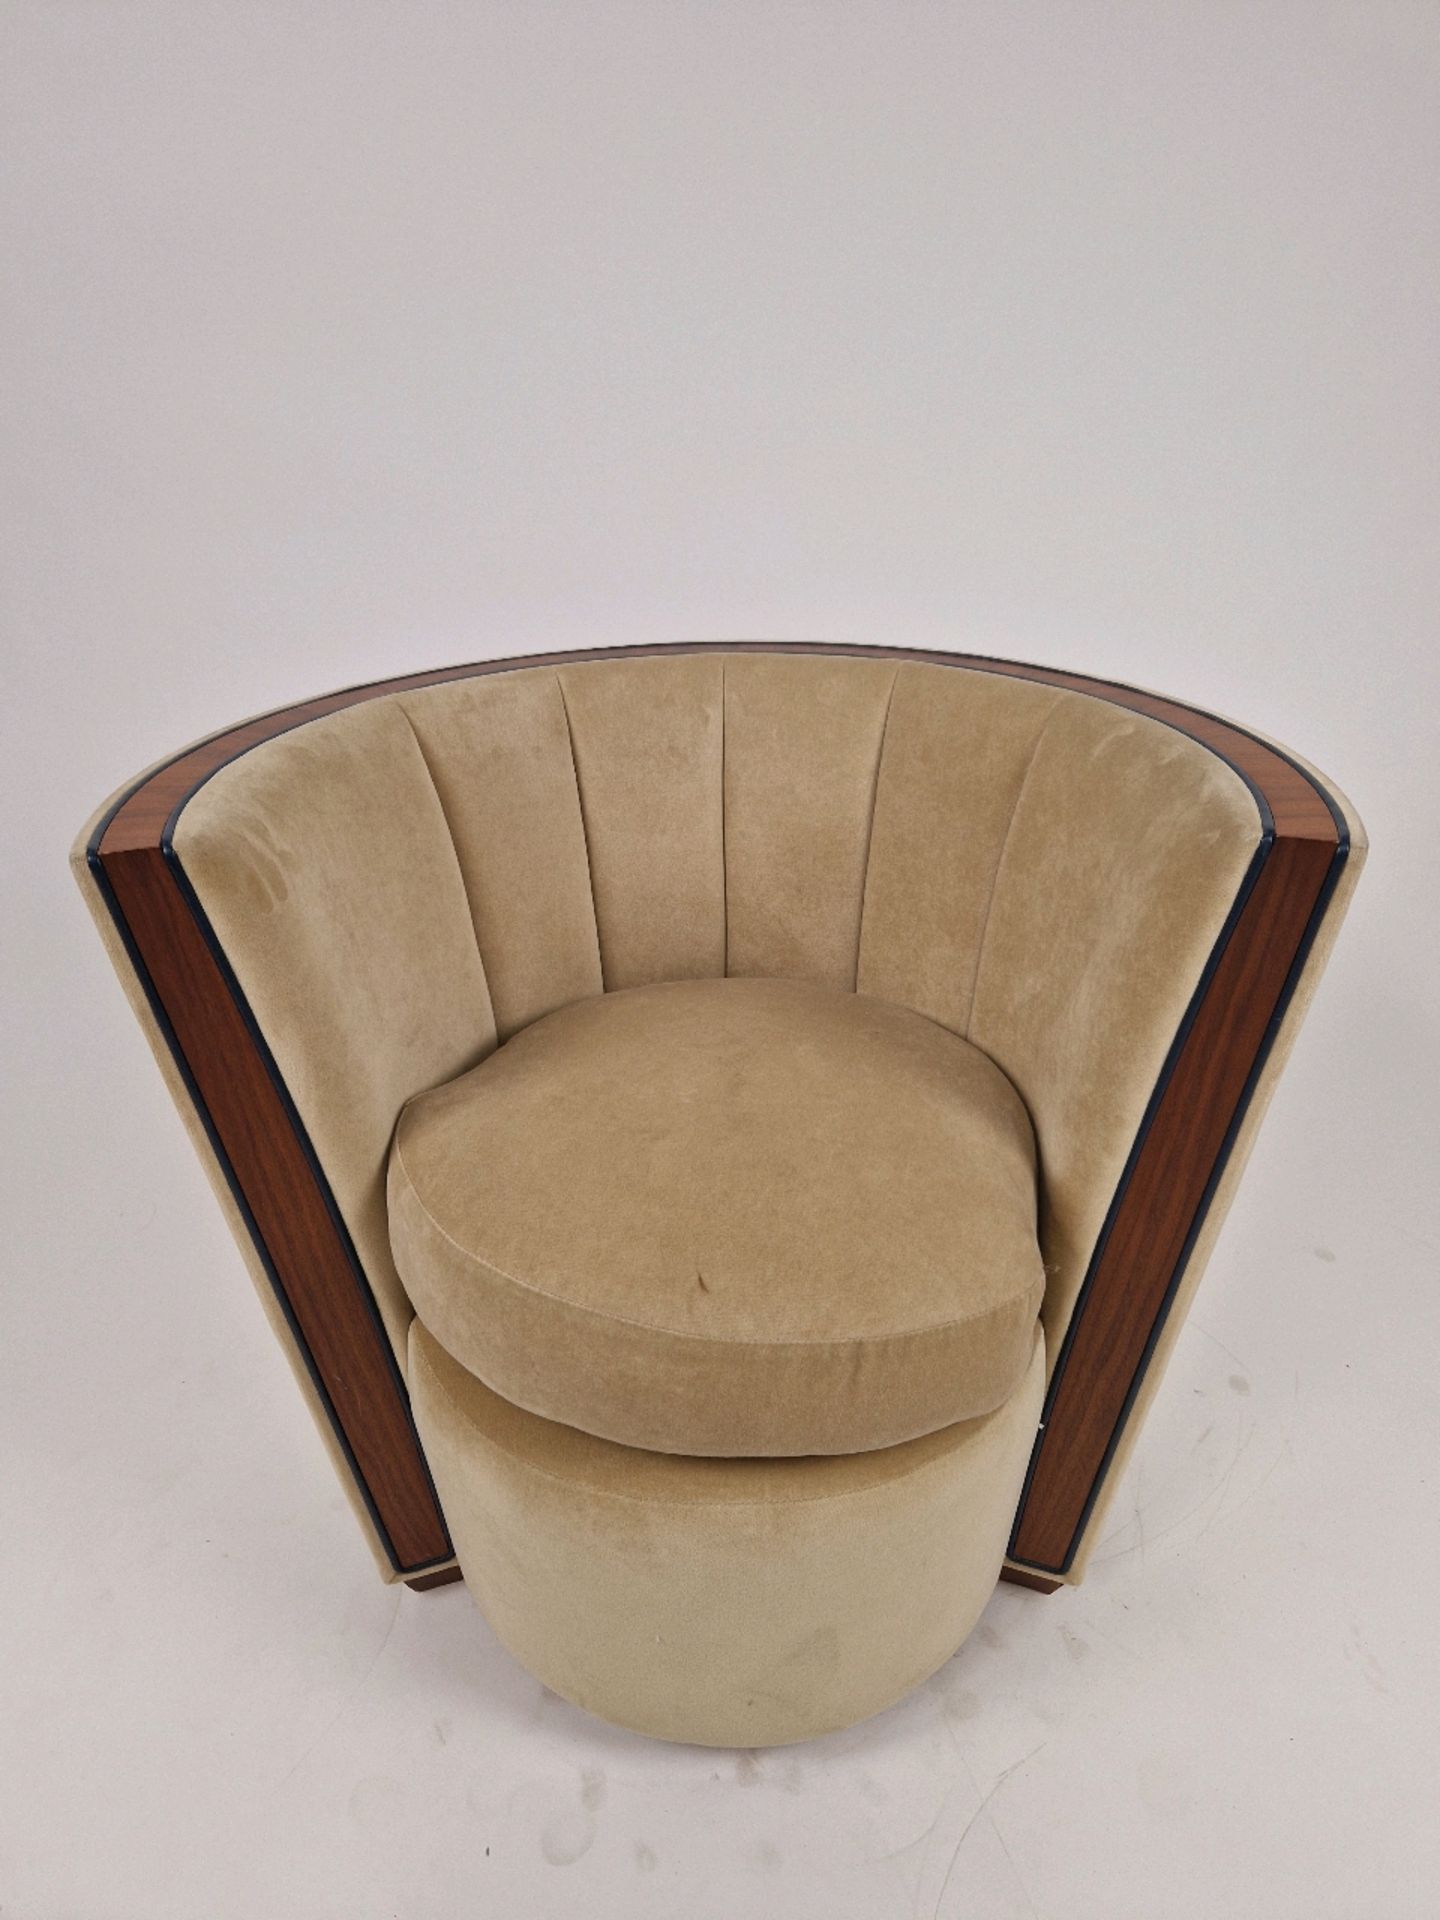 Bespoke David Linley Tub Chair Made for Claridge's Suites